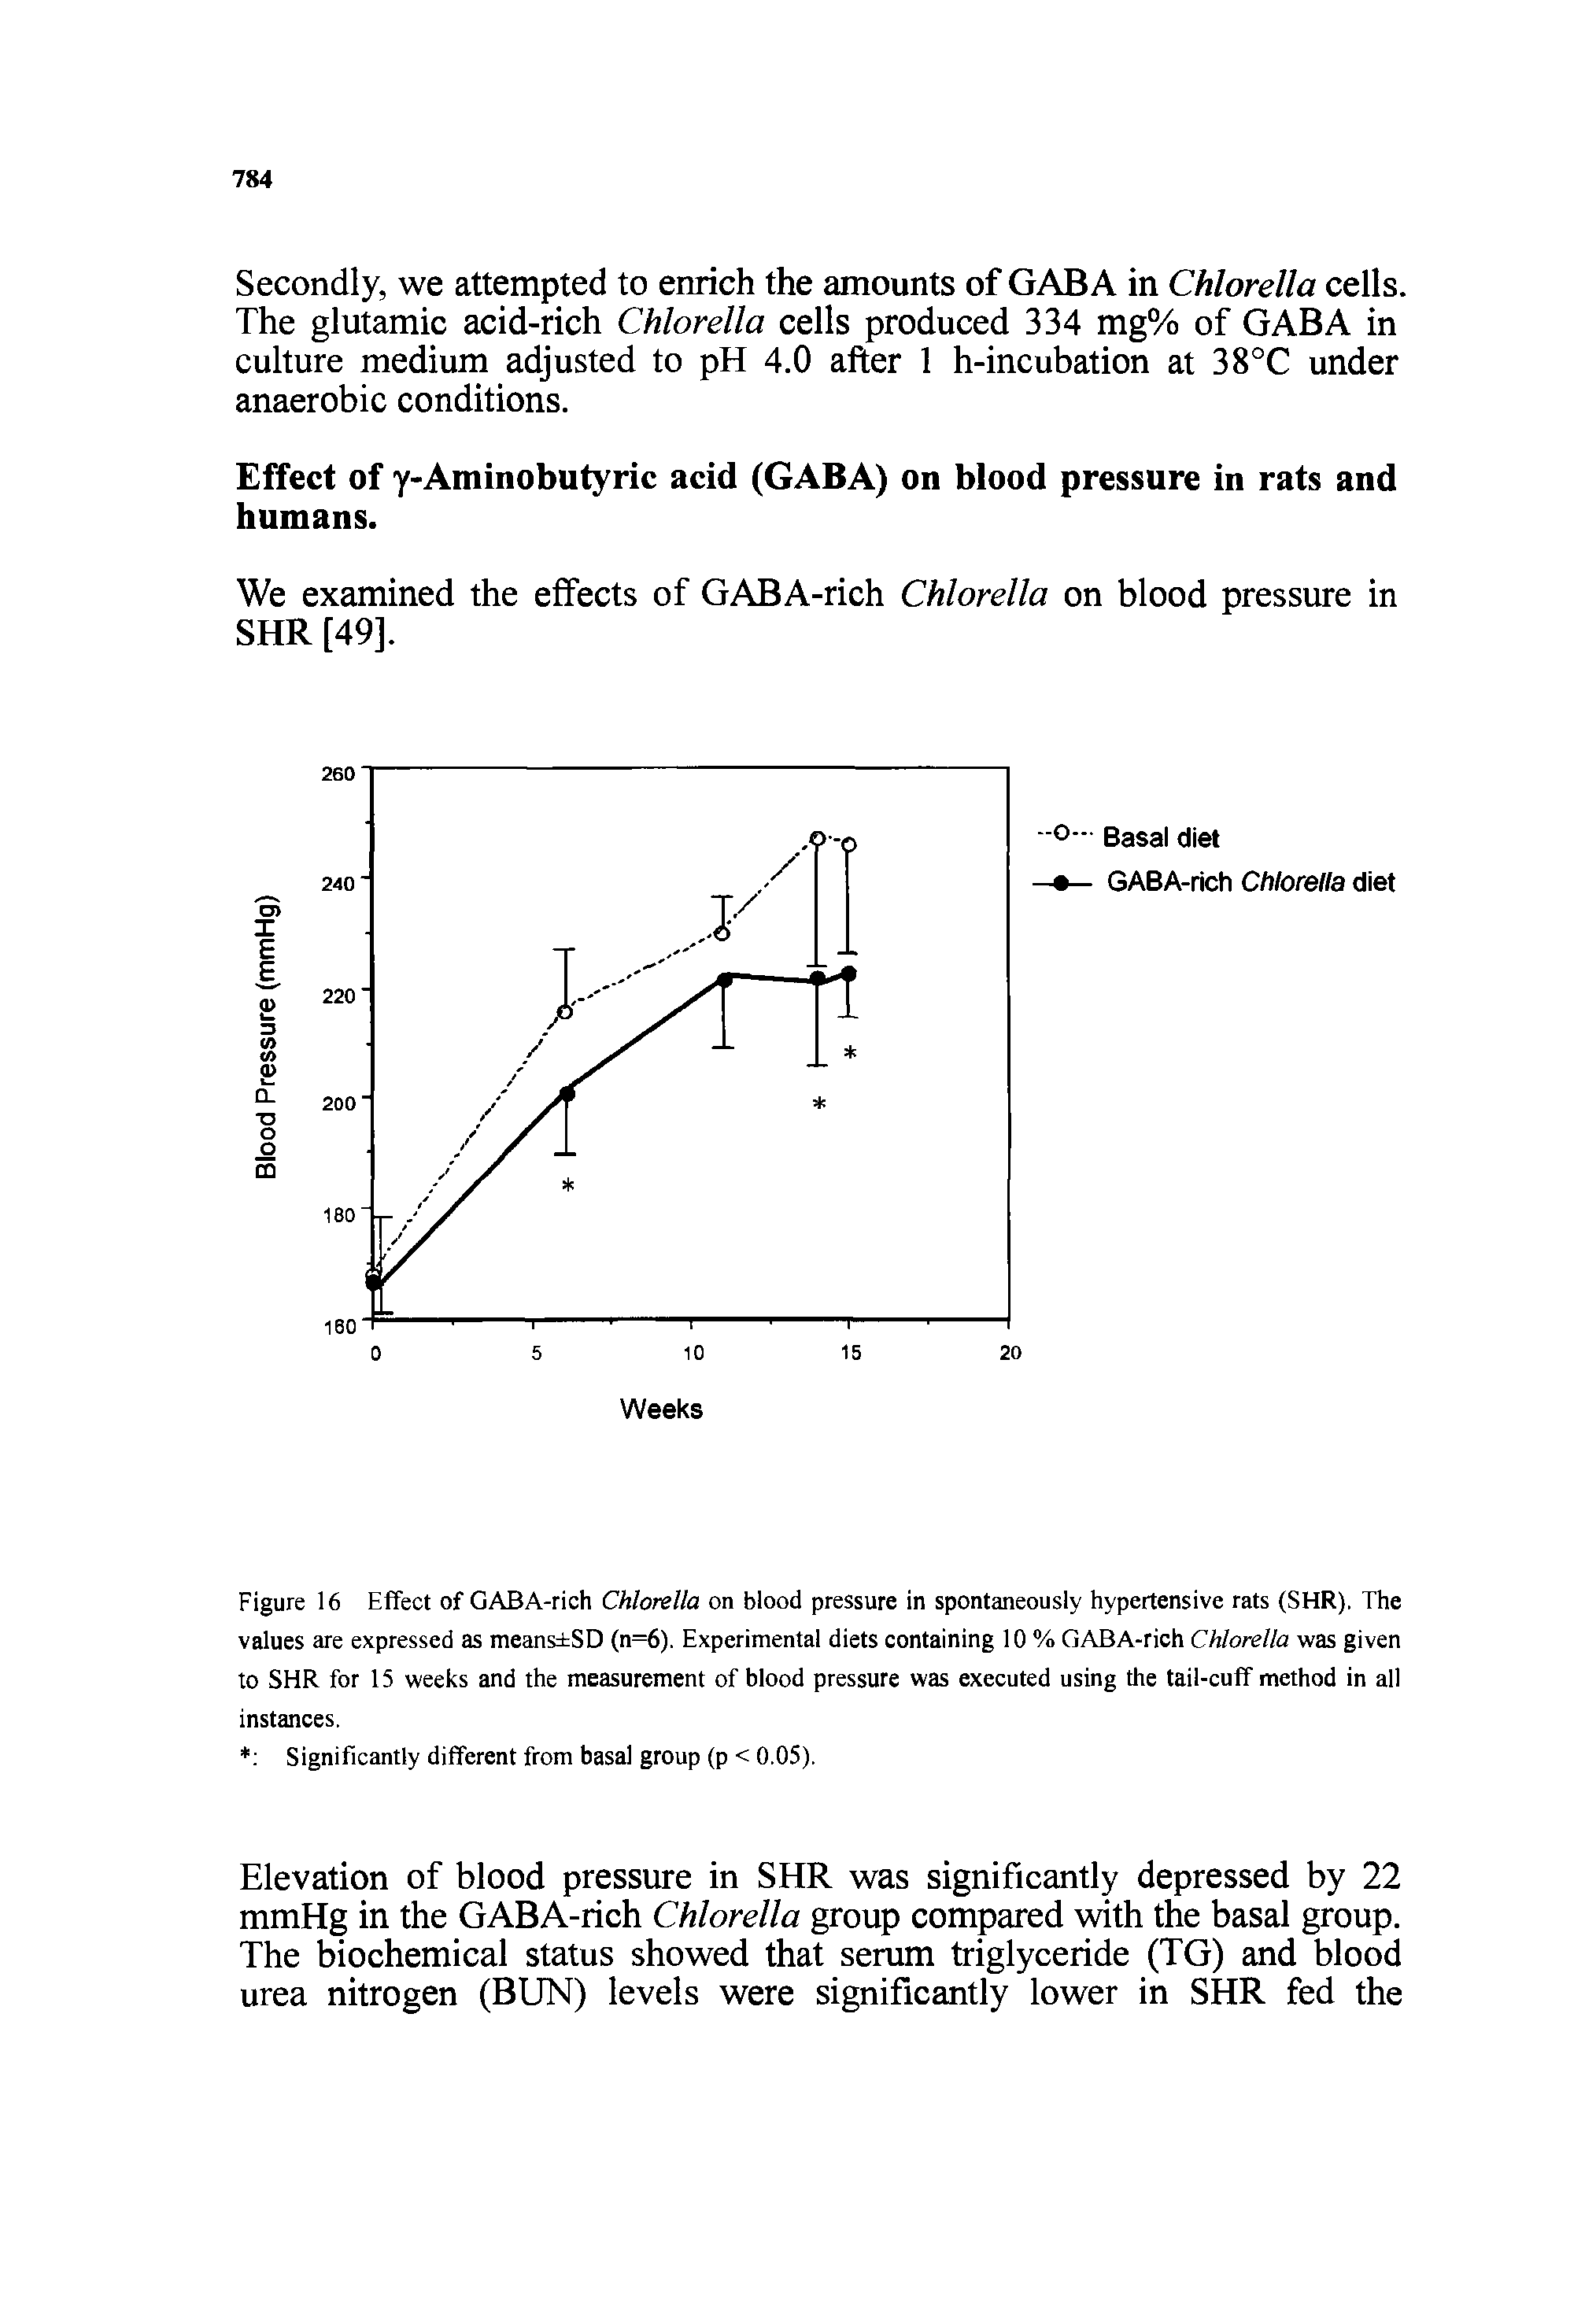 Figure 16 Effect of GABA-rich Chlorella on blood pressure in spontaneously hypertensive rats (SHR). The values are expressed as means SD (n=6). Experimental diets containing 10 % GABA-rich Chlorella was given to SHR for 15 weeks and the measurement of blood pressure was executed using the tail-cuff method in all instances.